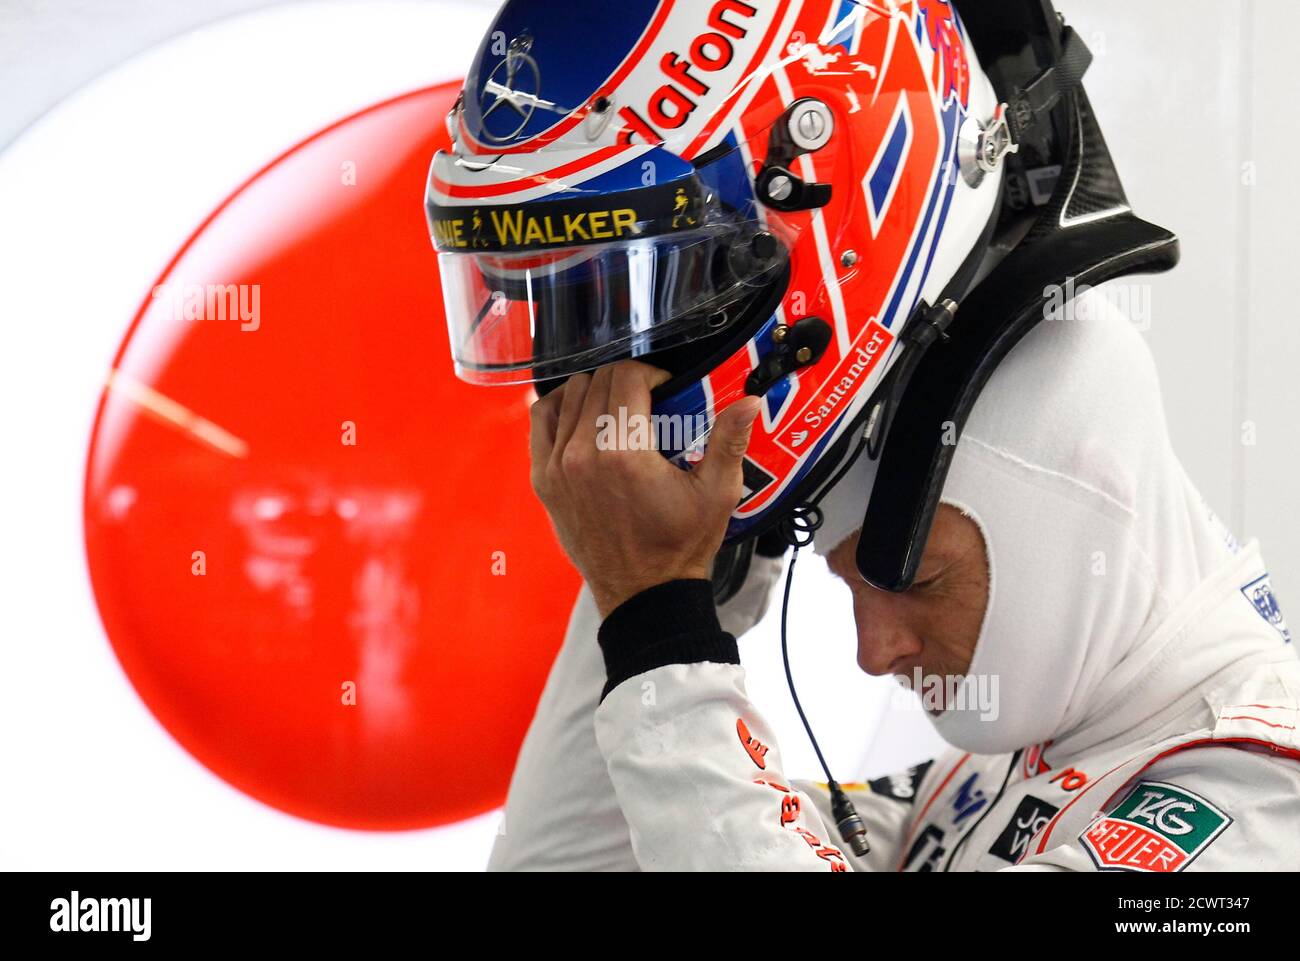 McLaren Formula One driver Jenson Button of Britain handles his helmet during the second practice session of the Canadian F1 Grand Prix at the Circuit Gilles Villeneuve in Montreal June 7, 2013. REUTERS/Chris Wattie (CANADA  - Tags: SPORT MOTORSPORT F1) Stock Photo